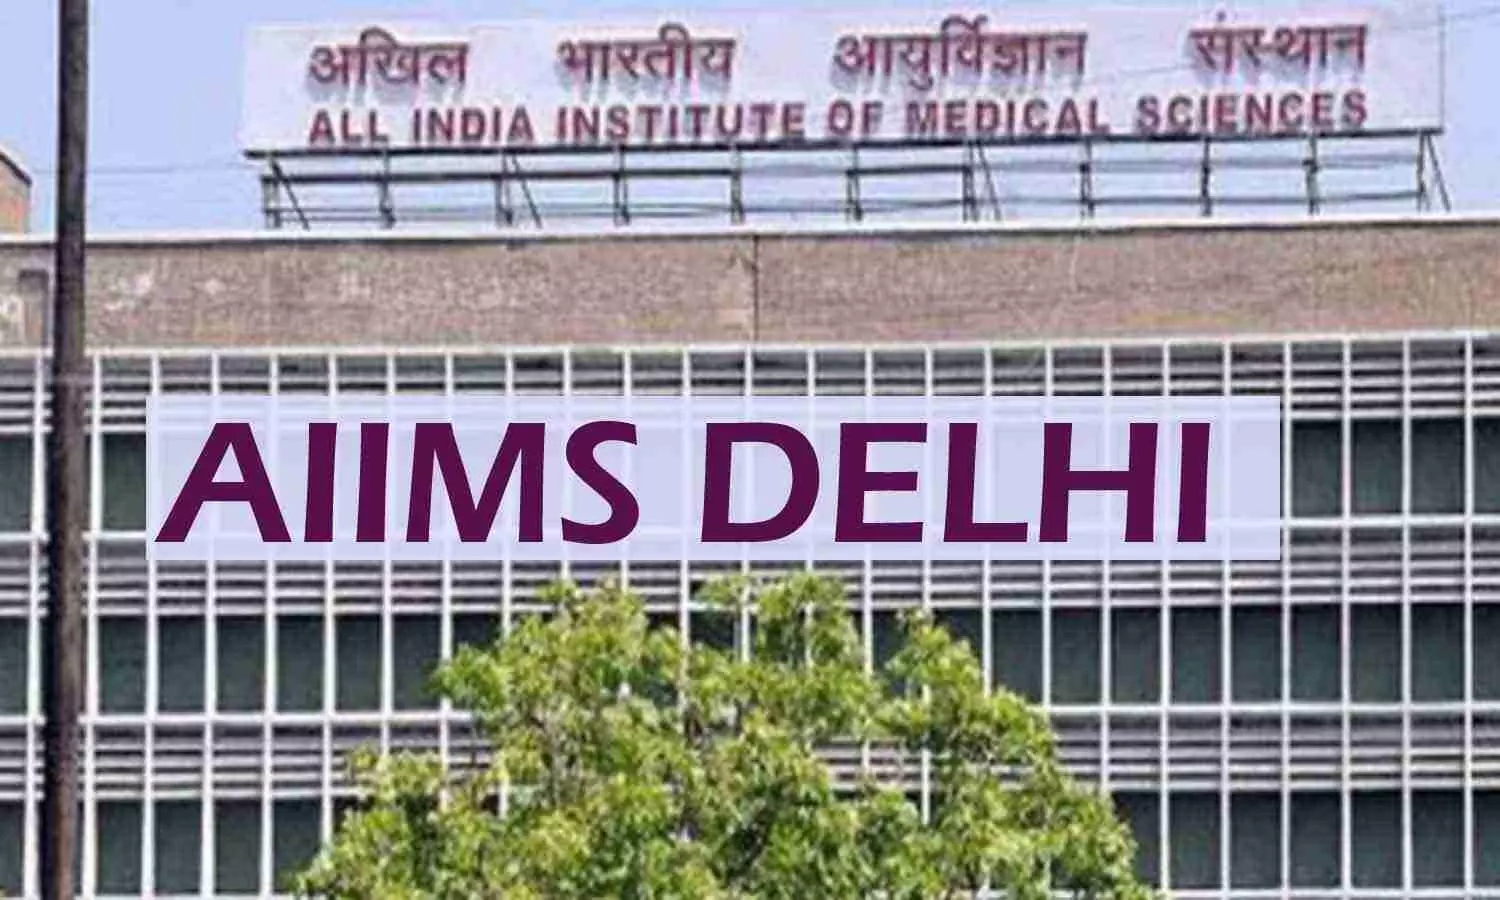 AIIMS Delhi cancels winter vacation, faculty asked to join duty immediately due to Omicron surge